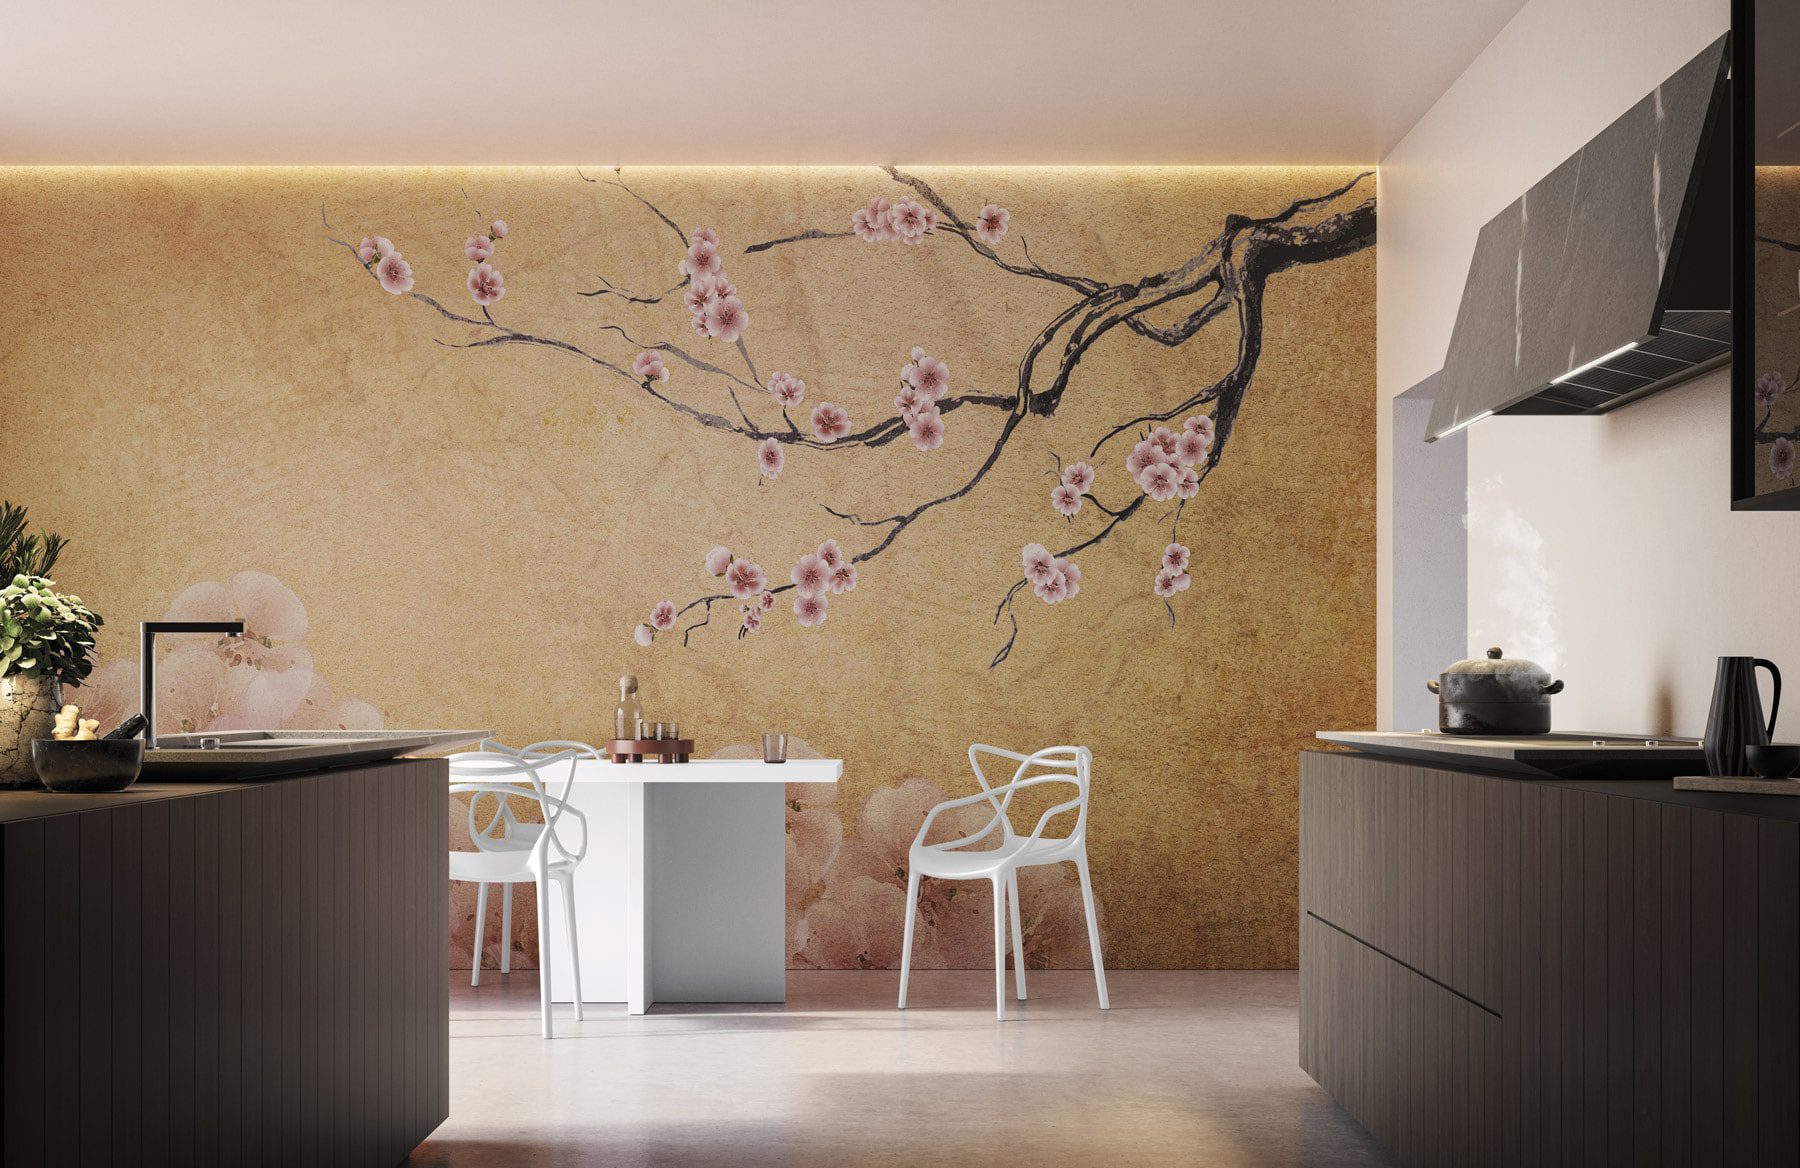 Japanese Floral Wallpaper by Instabilelab. Japan’s traditional elegance and contemporary interior design. Discover the collection.